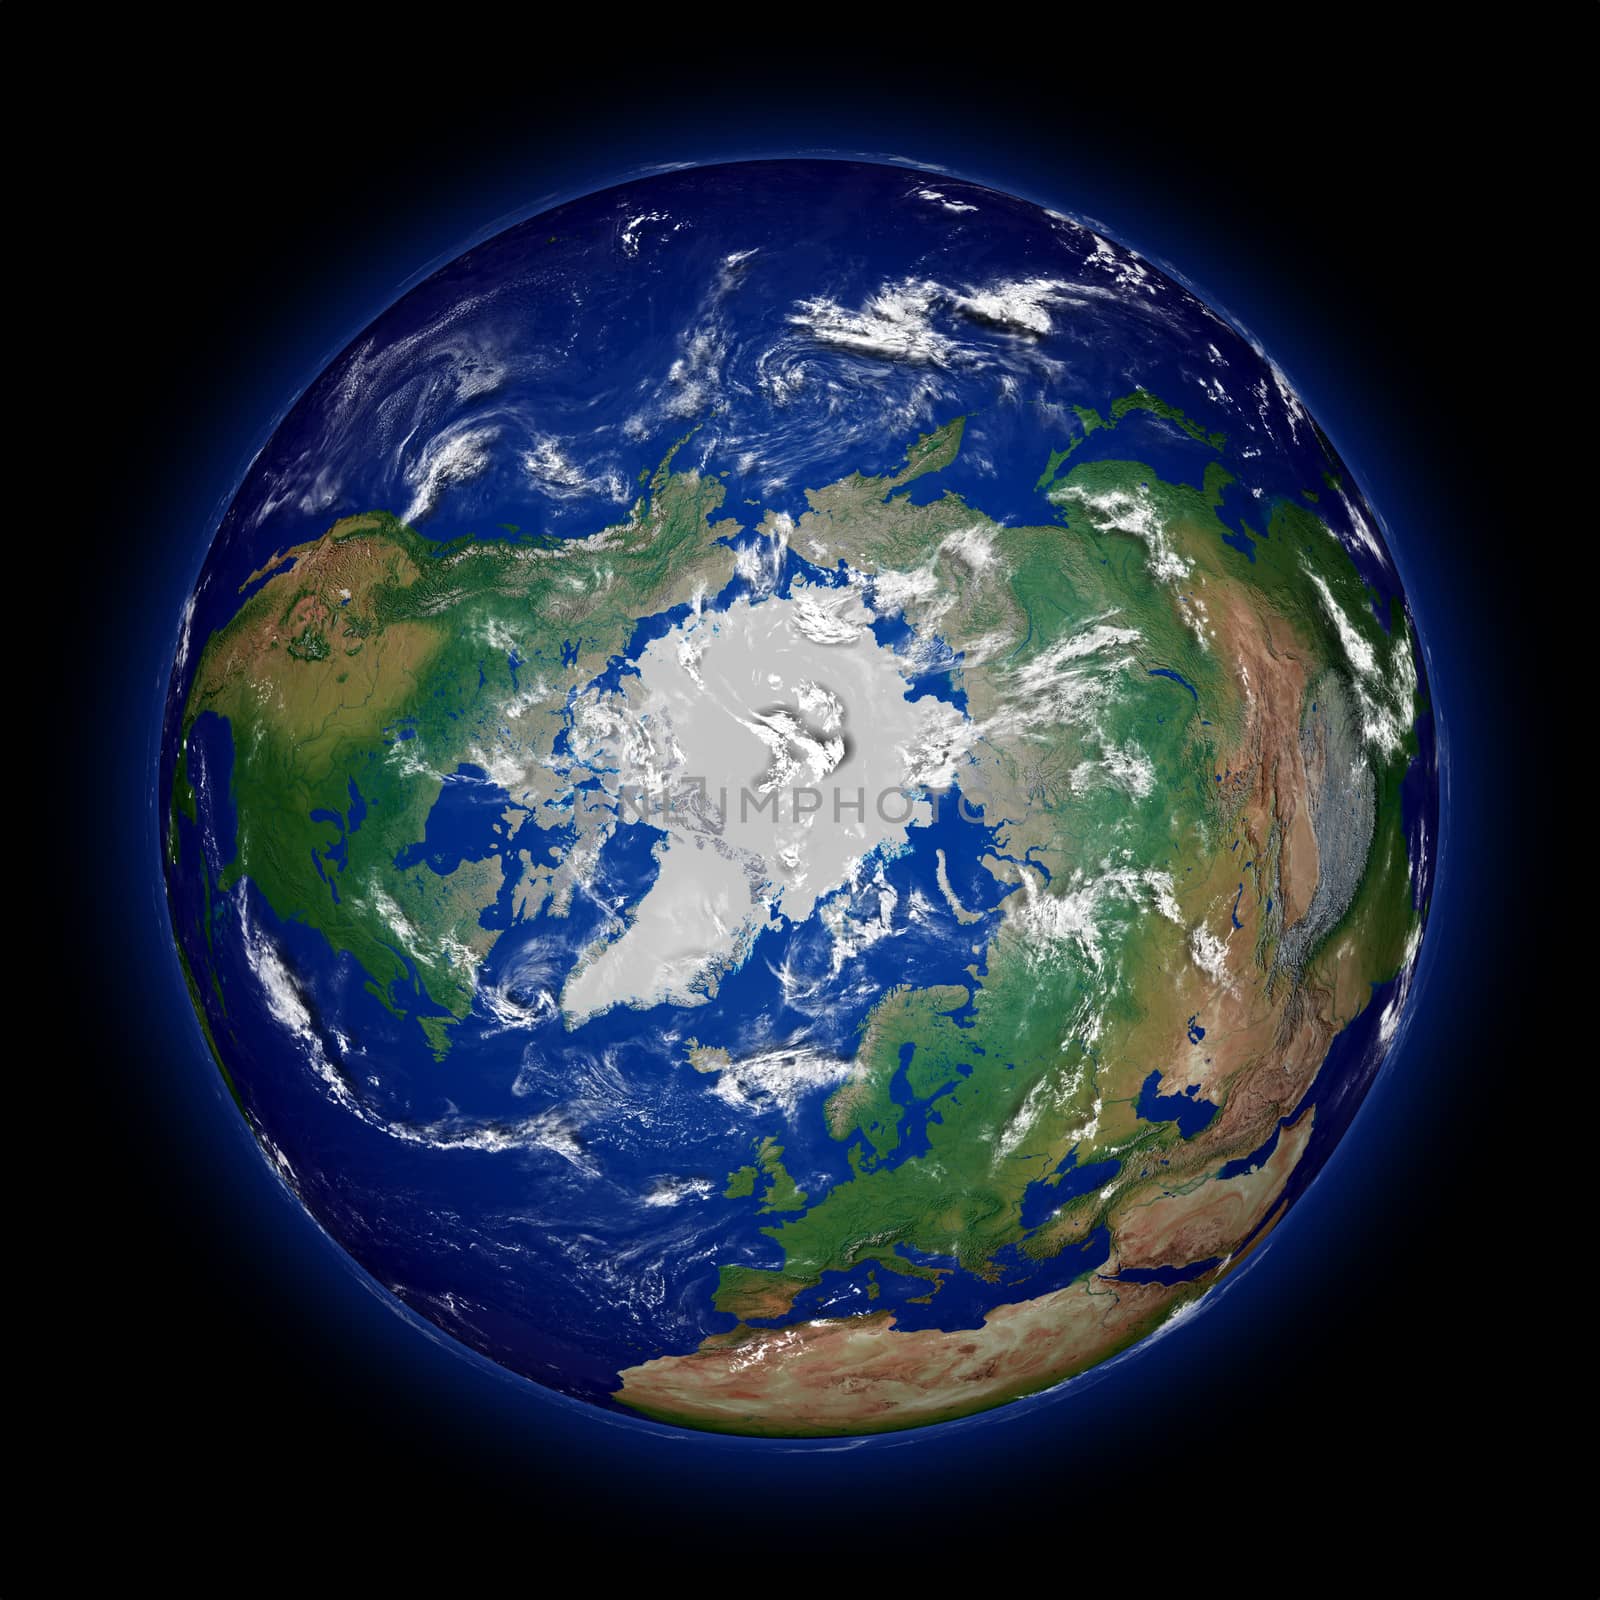 Northern hemisphere on Earth viewed from above north pole isolated on black background. High detail planet surface. Elements of this image furnished by NASA.